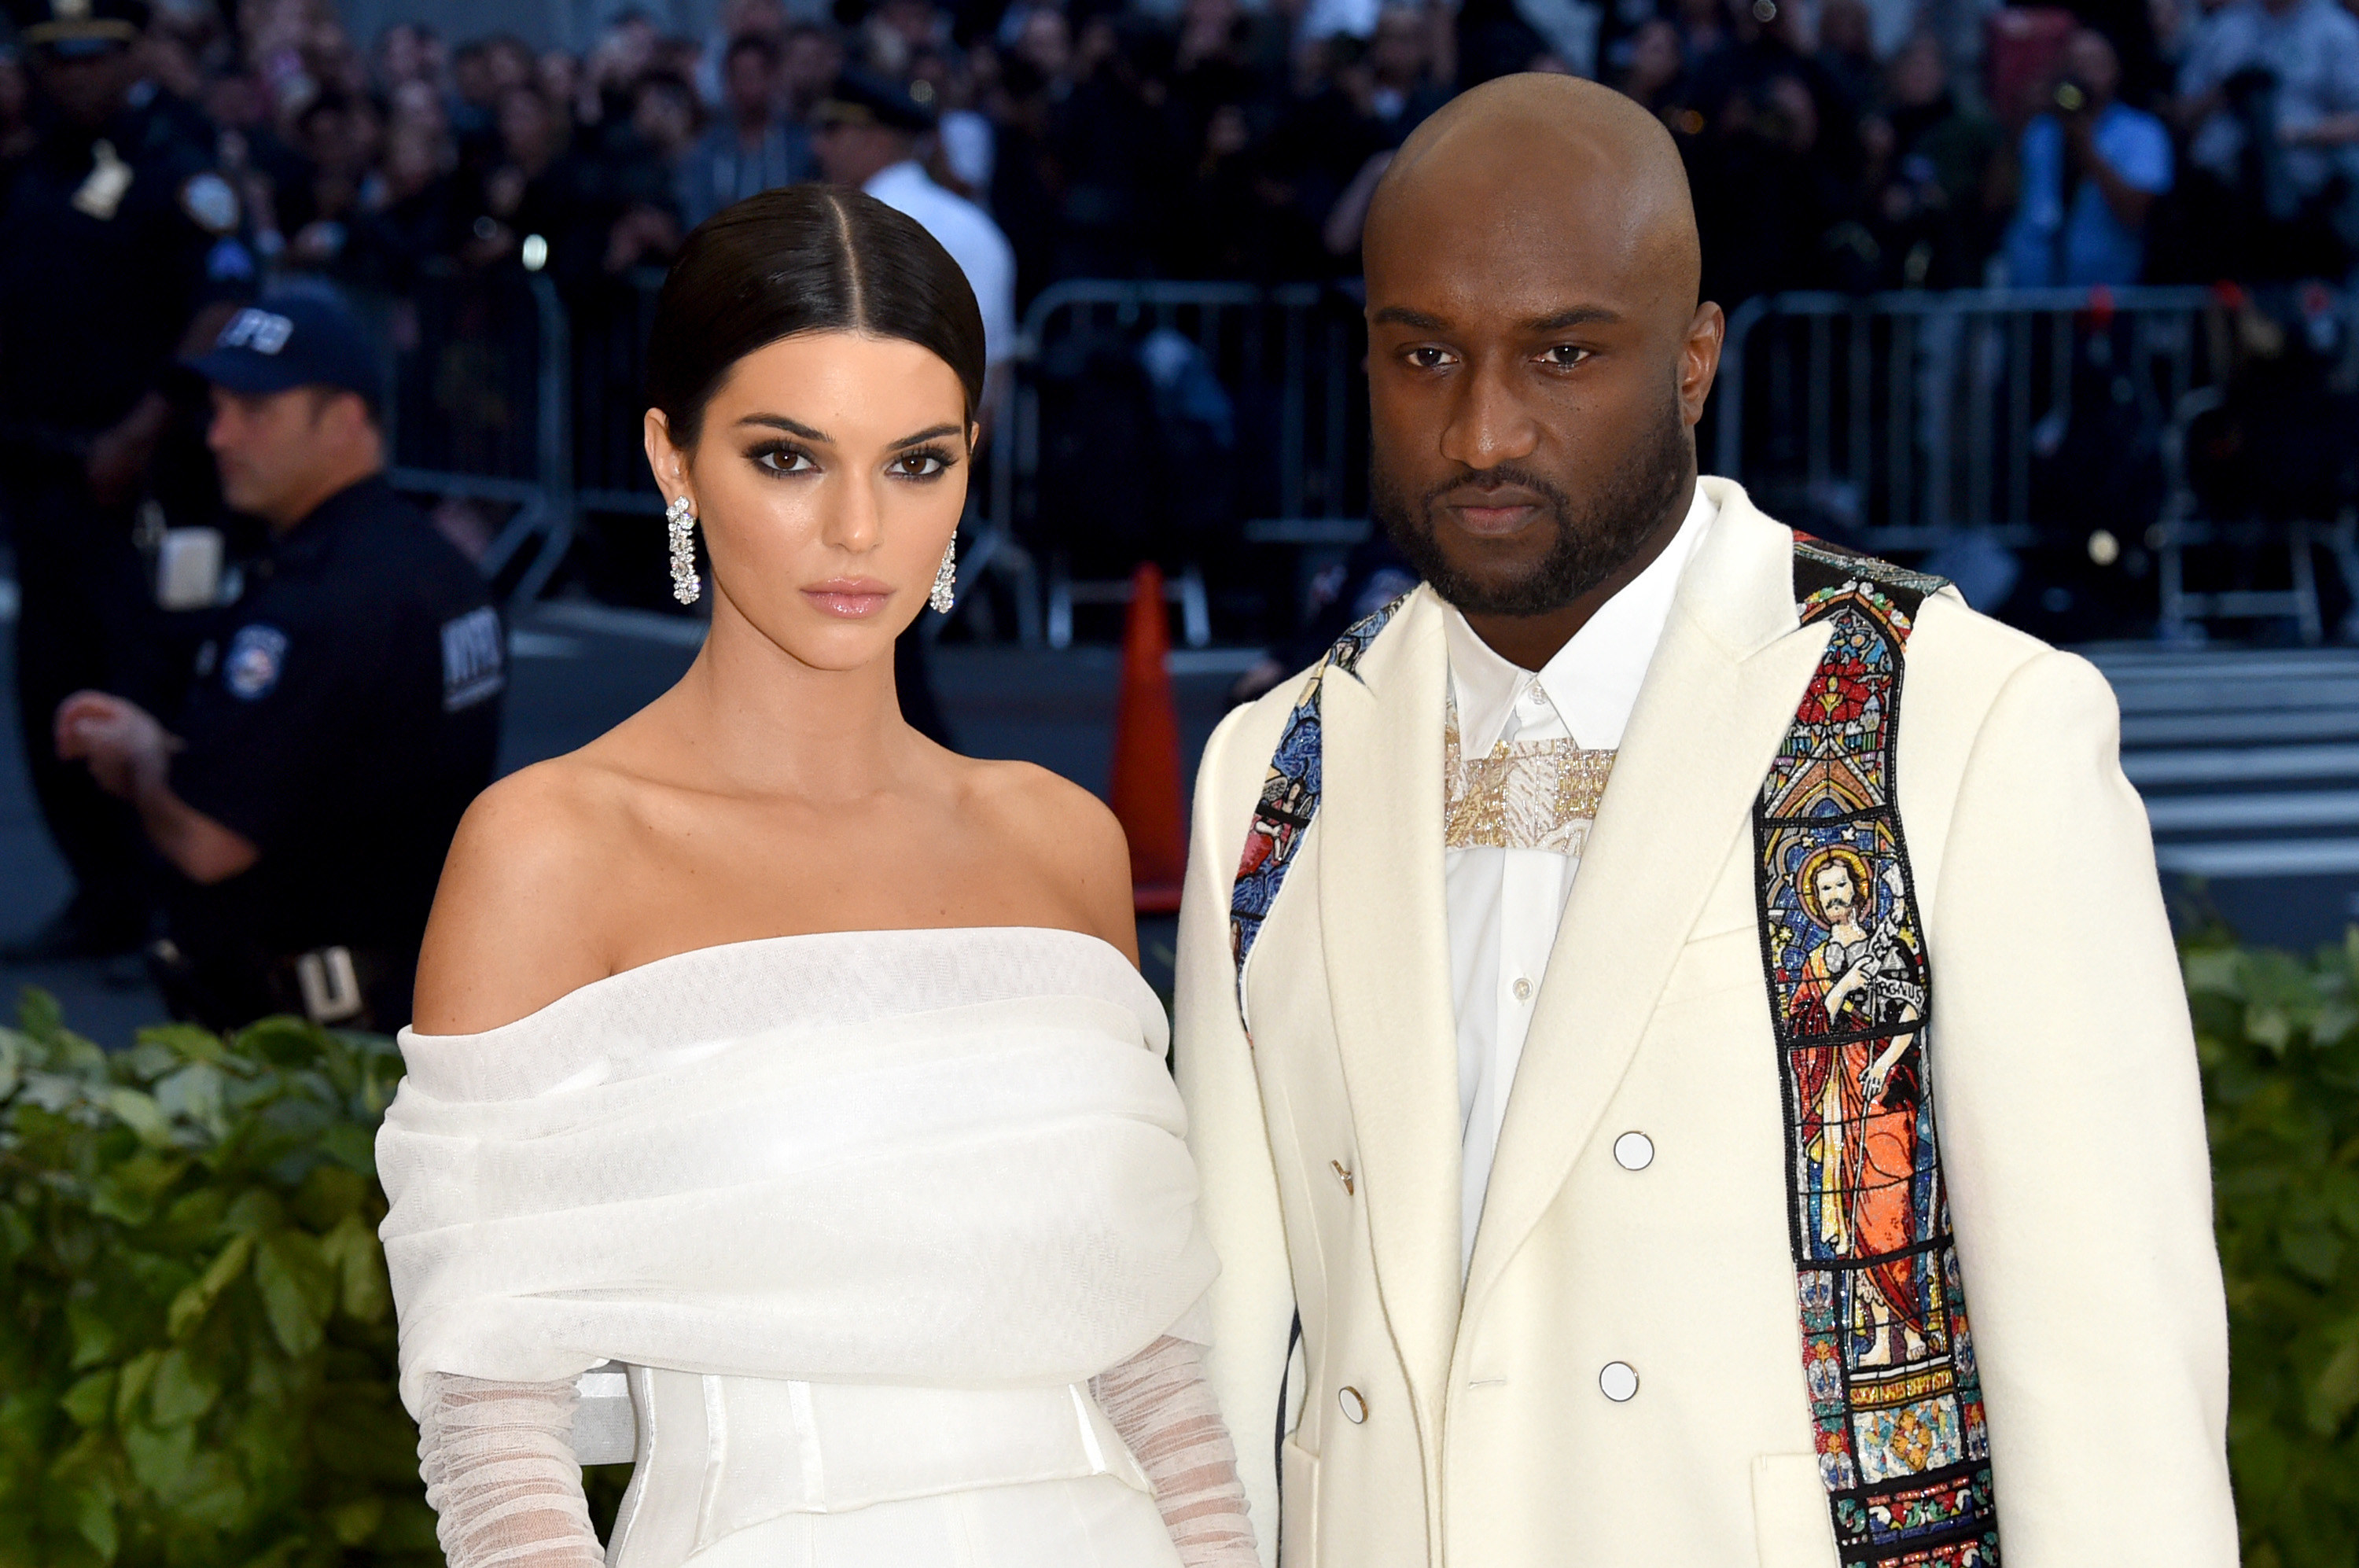 Kendall Jenner and Virgil Abloh attend The Met Gala on May 7, 2018 at the Metropolitan Museum of Art in New York City.